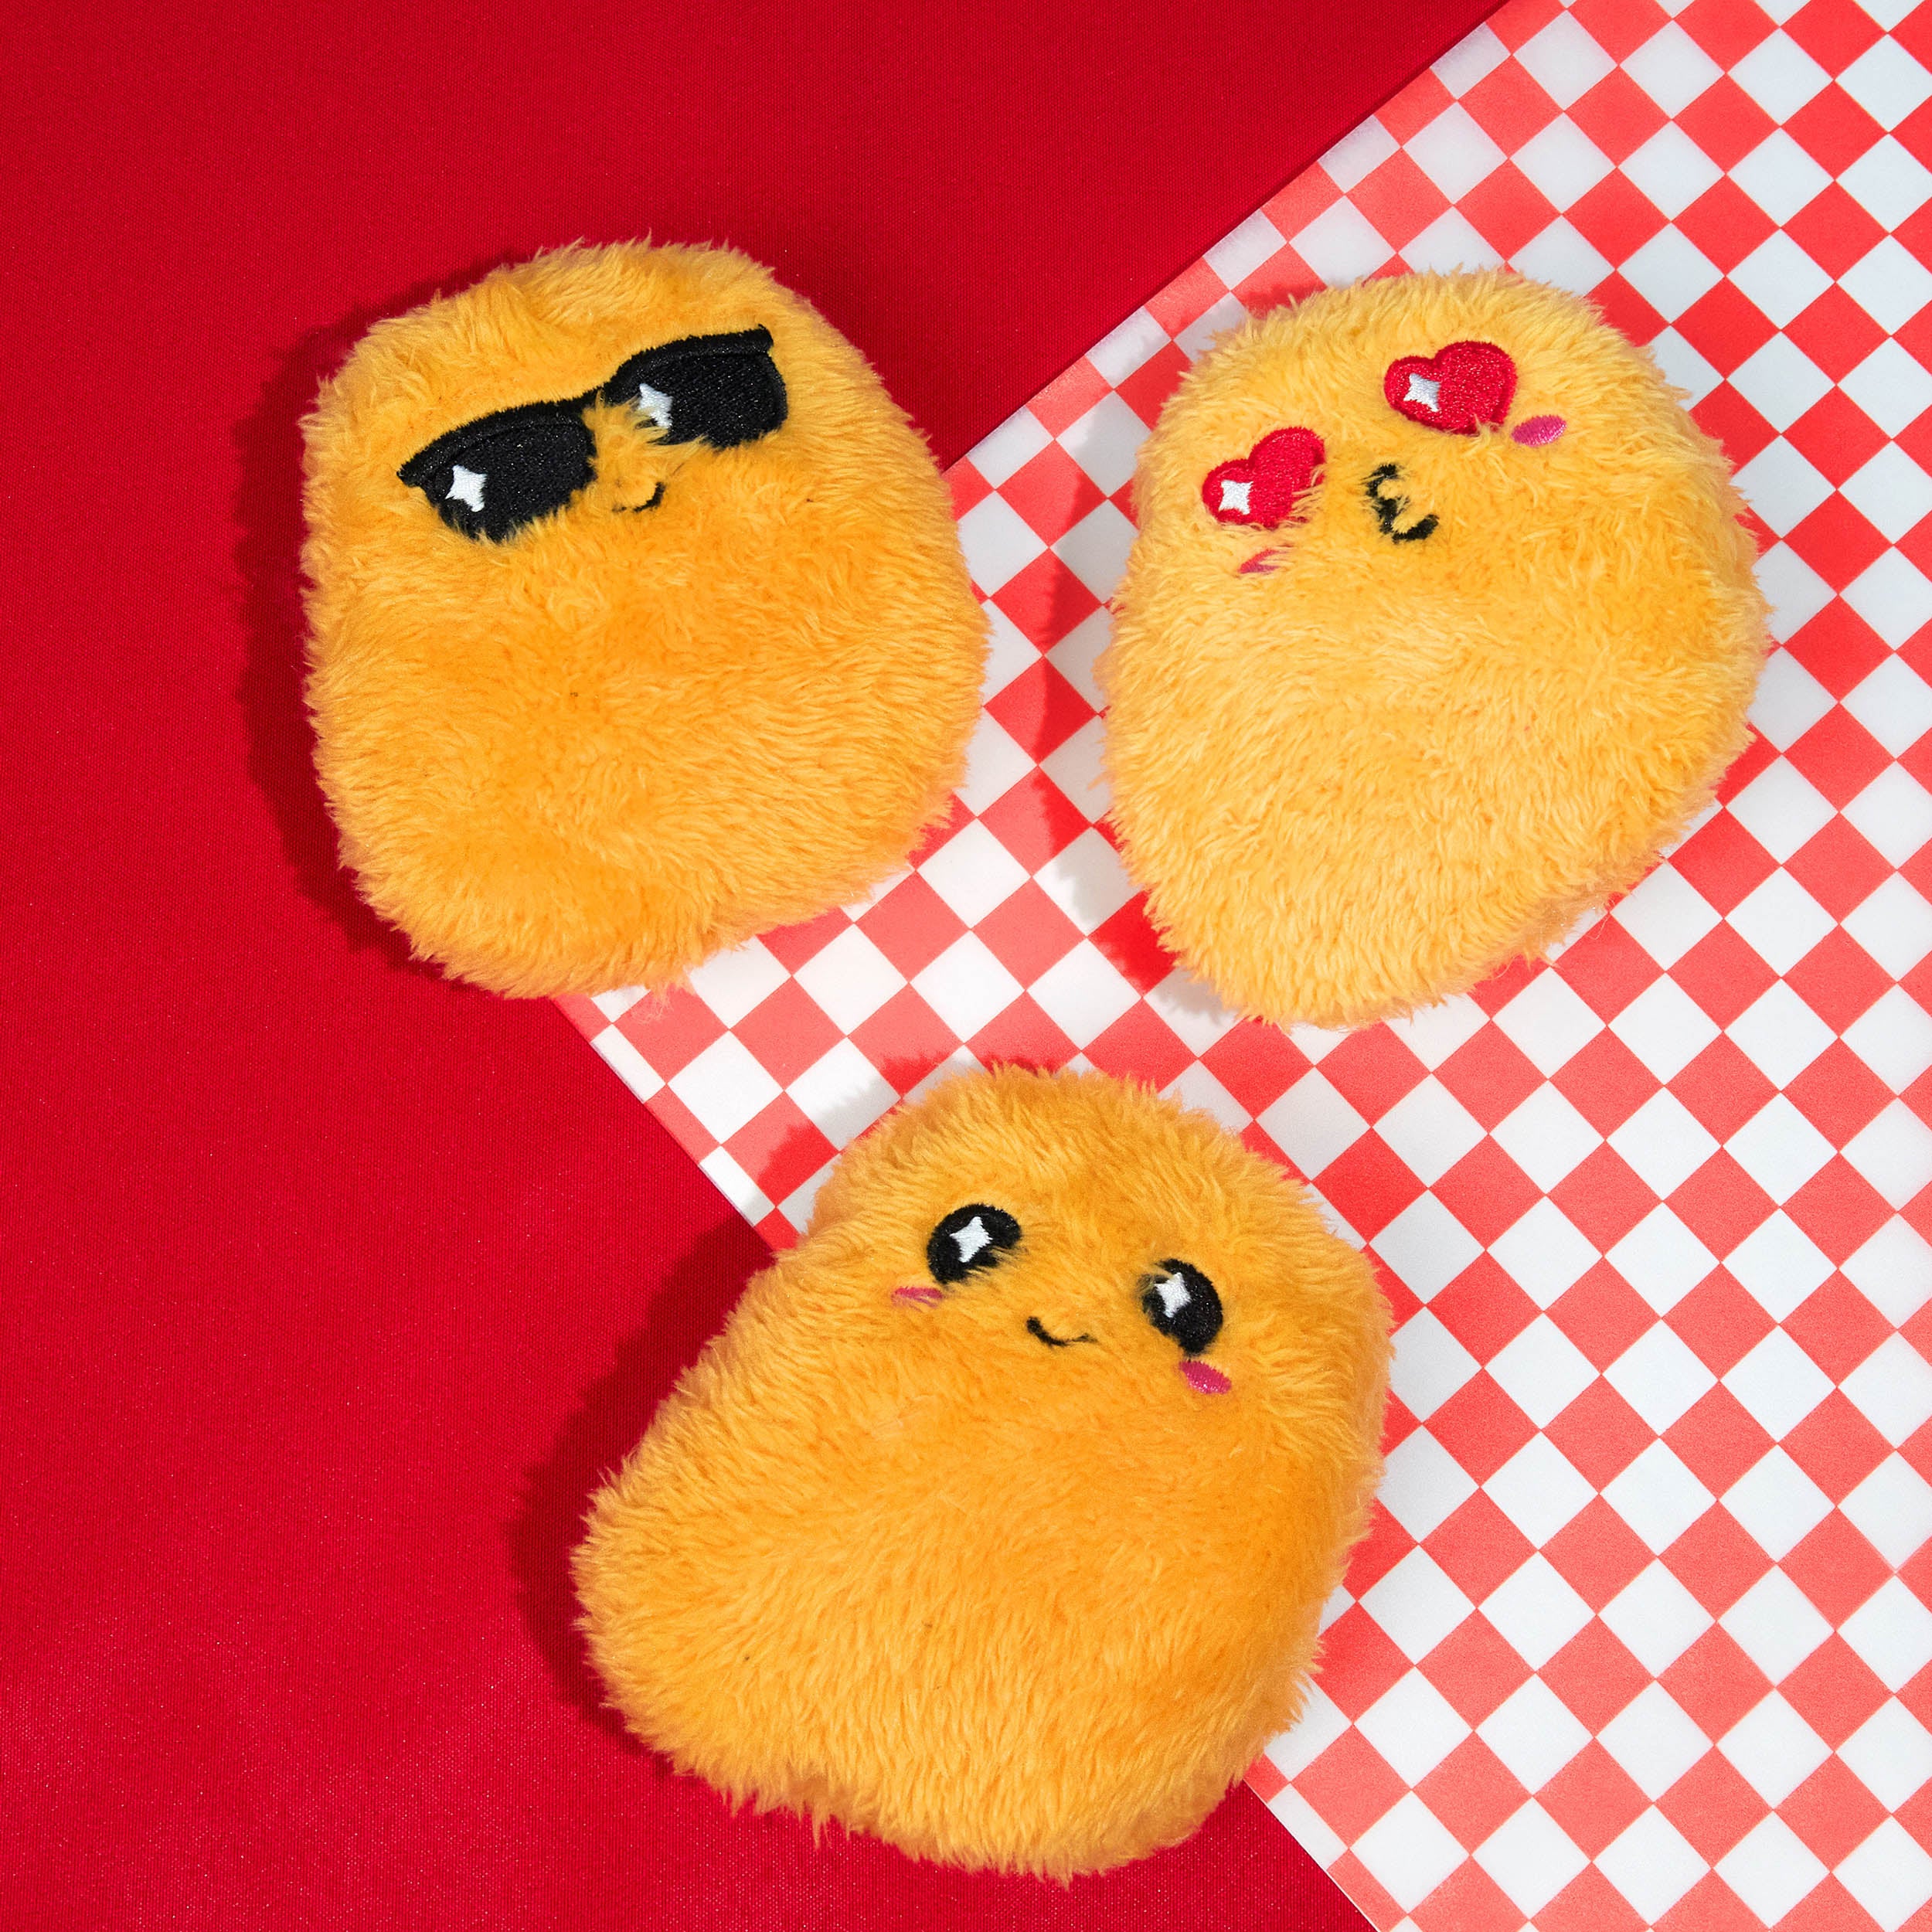 Emotional Support Nuggets - Cuddly Plush Comfort Food